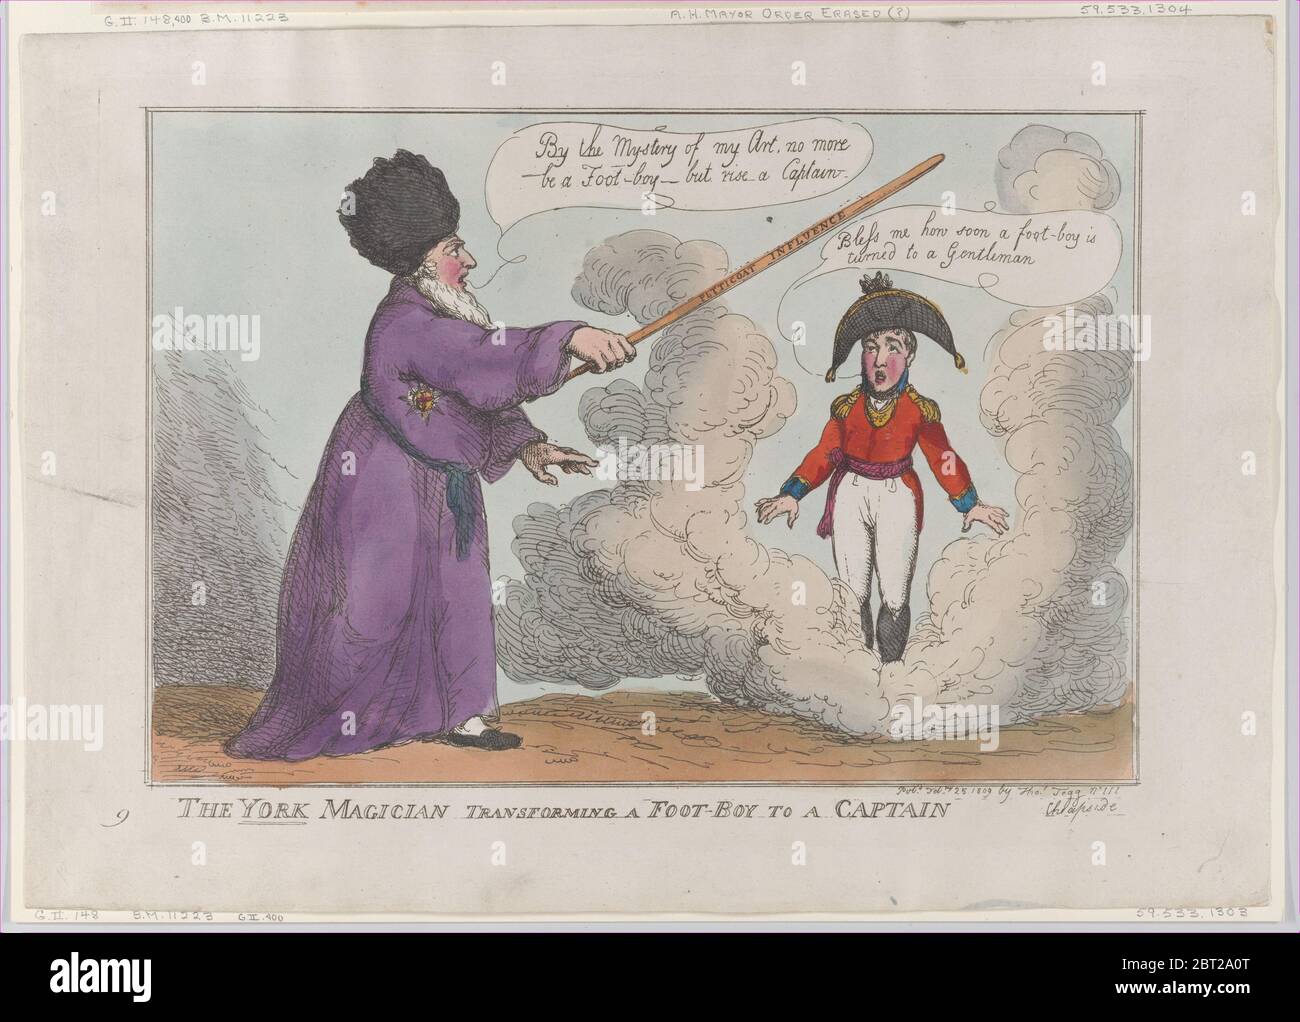 The York Magician Transforming a Foot-Boy to a Captain, February 25, 1809. Stock Photo